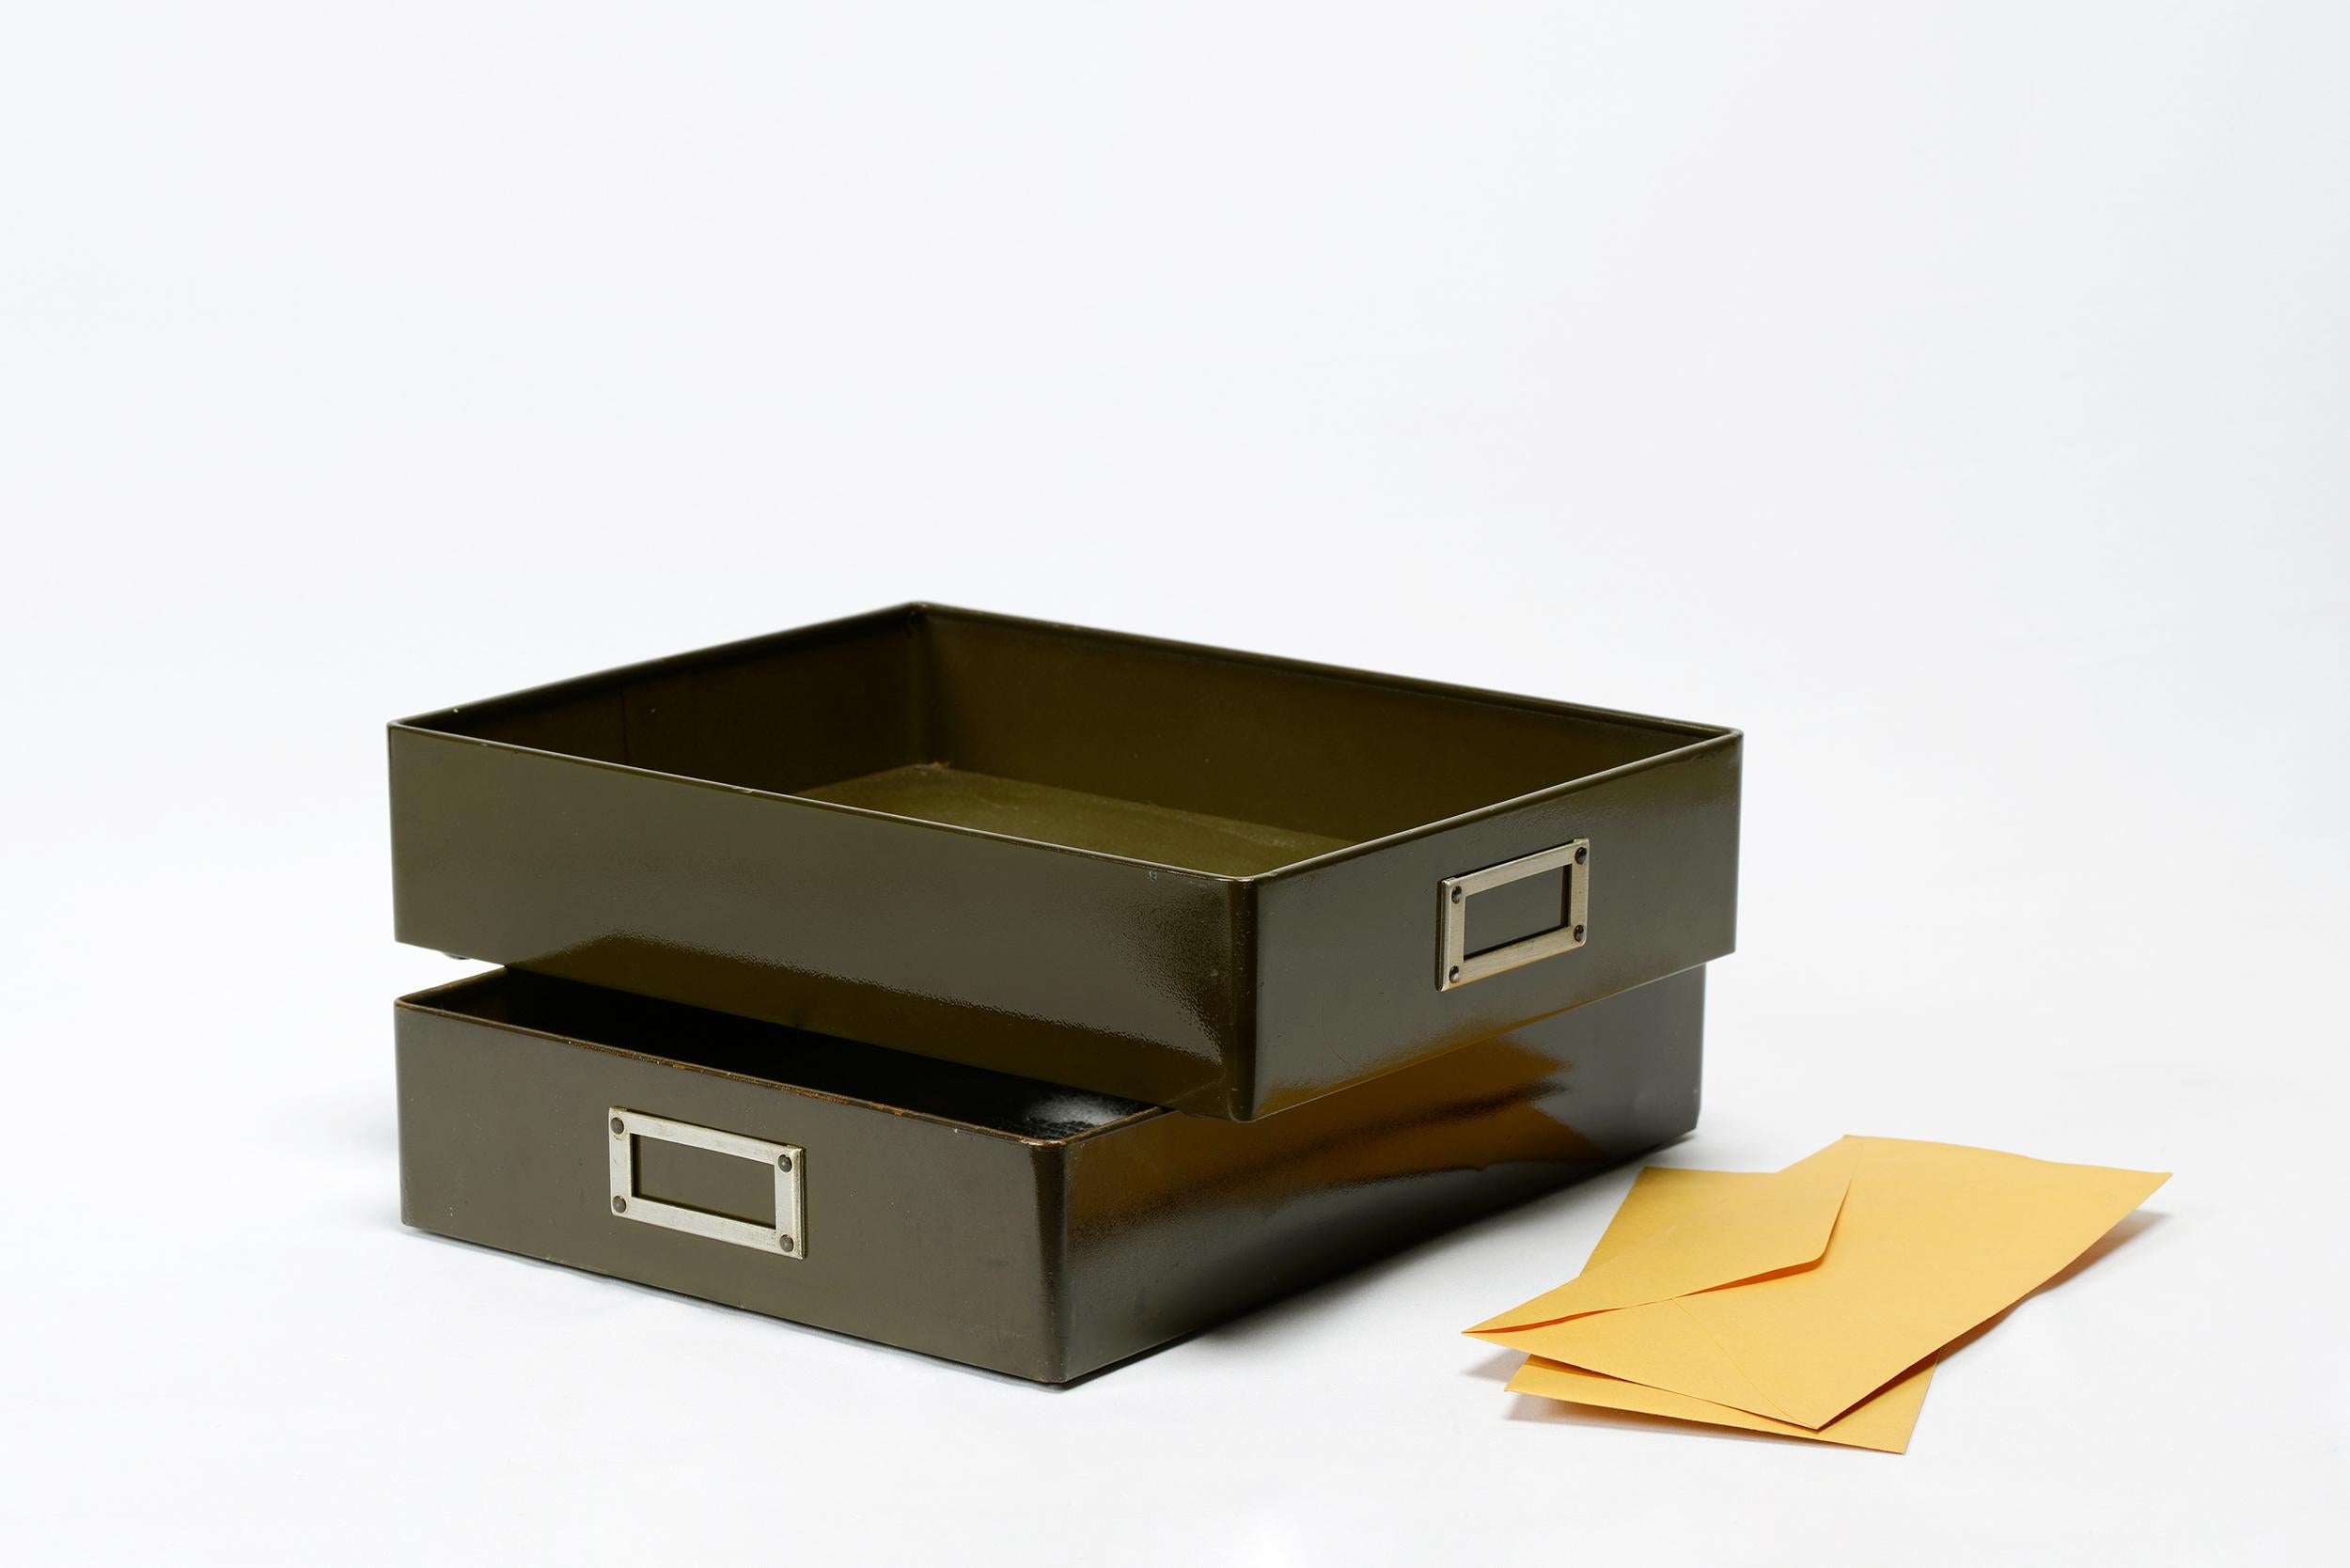 1940s steel drawer insert repurposed as a desktop organizer. Ideal for sorting mail and memos. Stack 'em or use 'em side by side. We're selling each in 